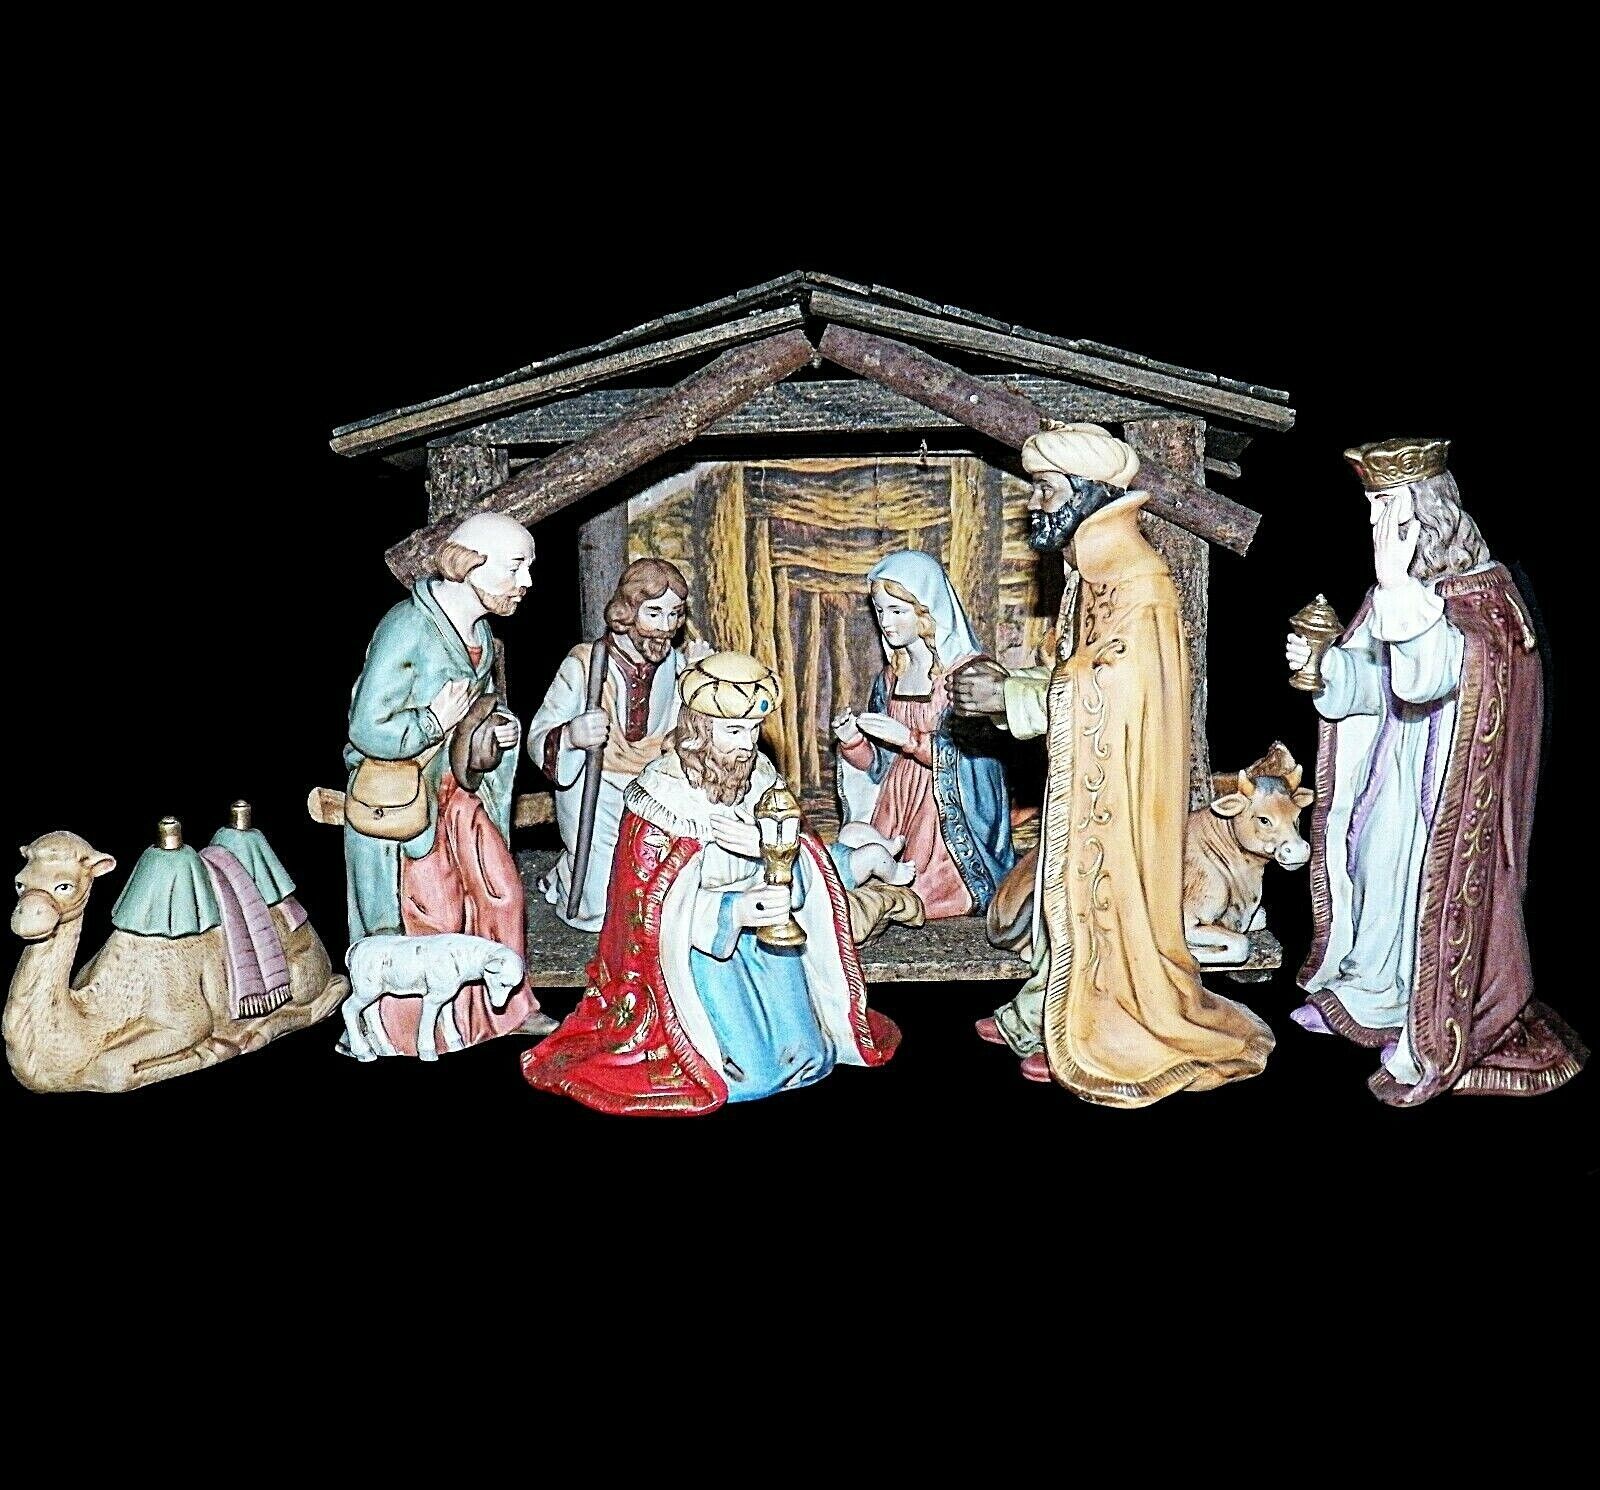 Lefton 1985 Spirit of Bethlehem Collection Nativity Set 05374 with Stable Creche - $239.99